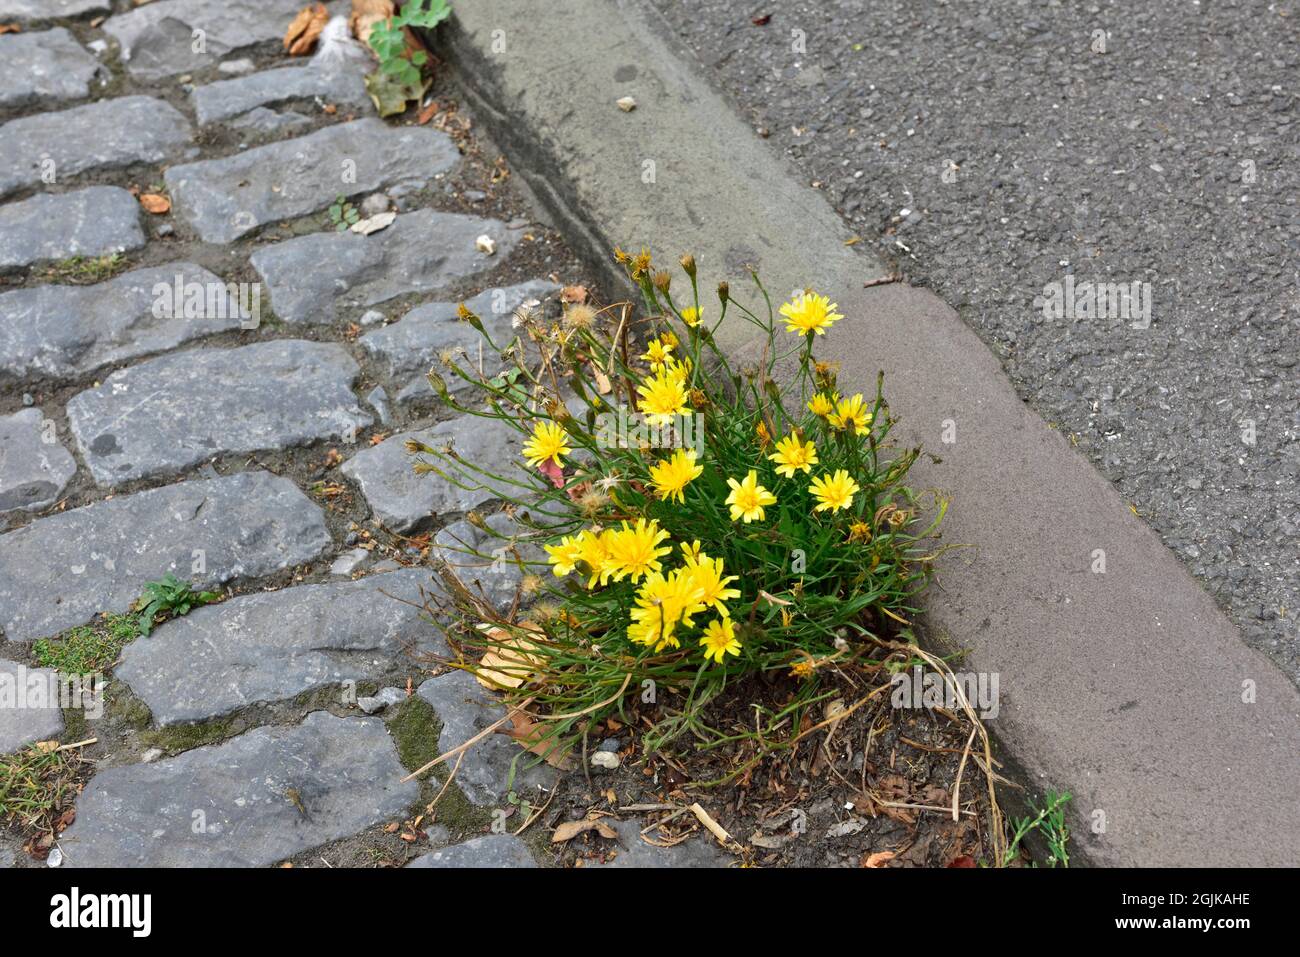 Weeds with yellow flowers growing in cracks of pavement of road, UK Stock Photo